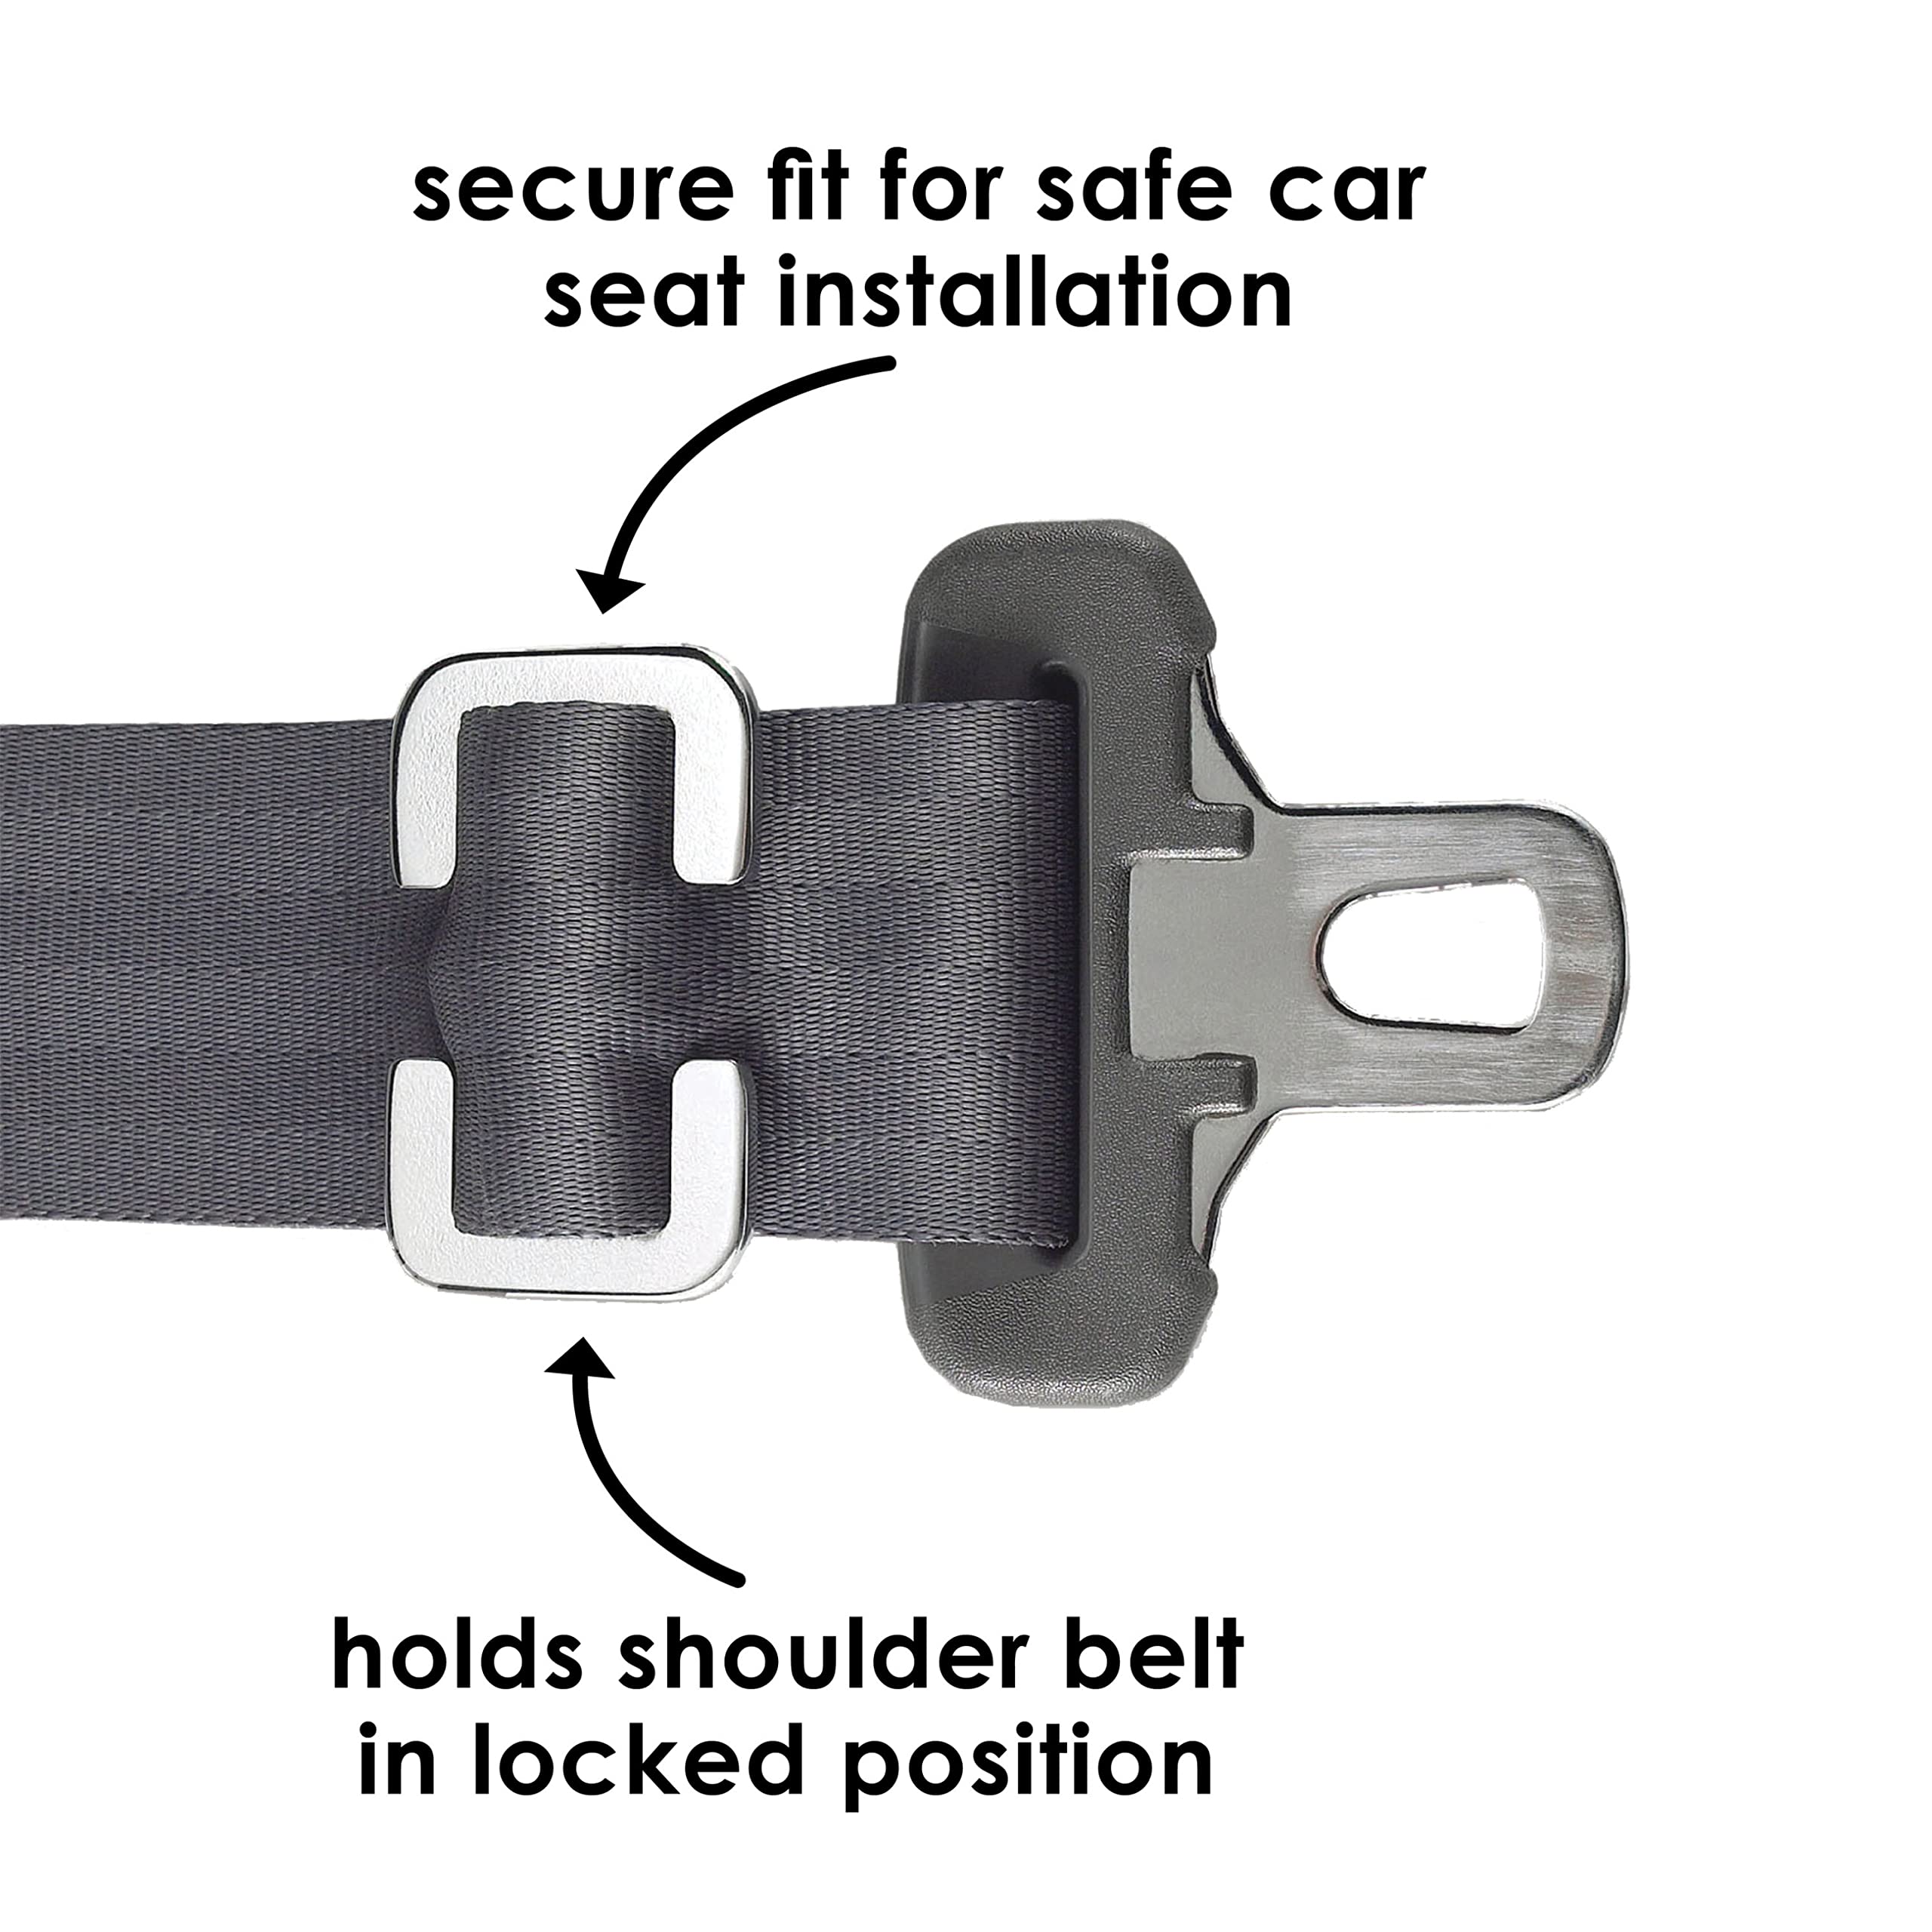 Diono Super Lock Seat Belt Lock Clip for Kids, Keeps Seat Belt Secure for A Proper Fit Every Time, Made from Reinforced Steel, Silver